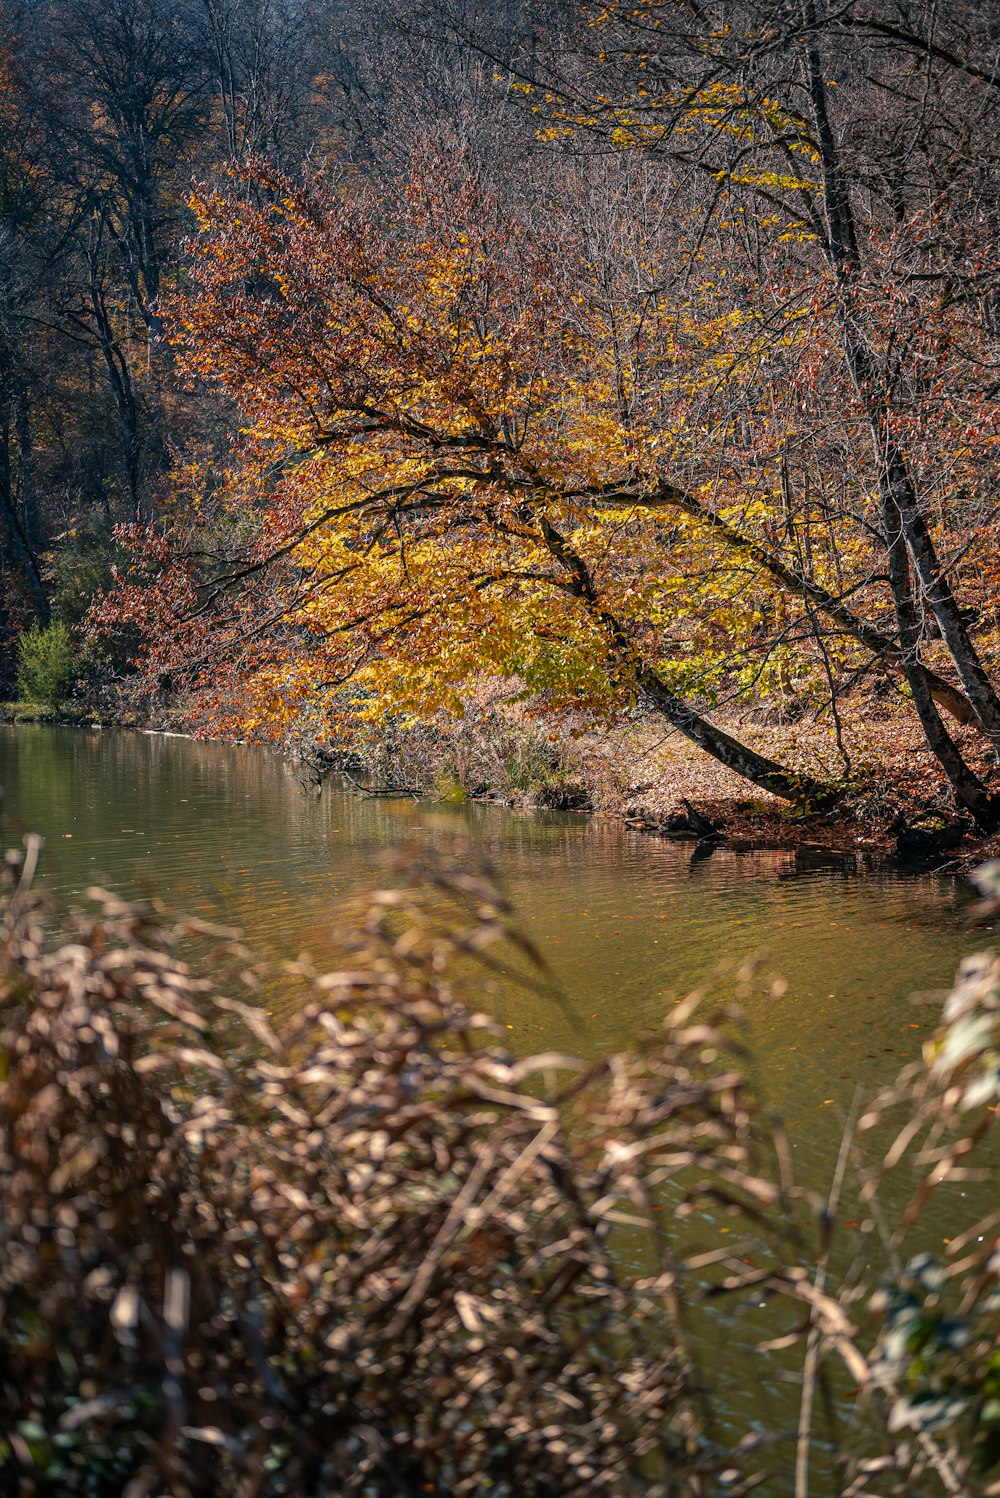 a body of water surrounded by trees in the fall